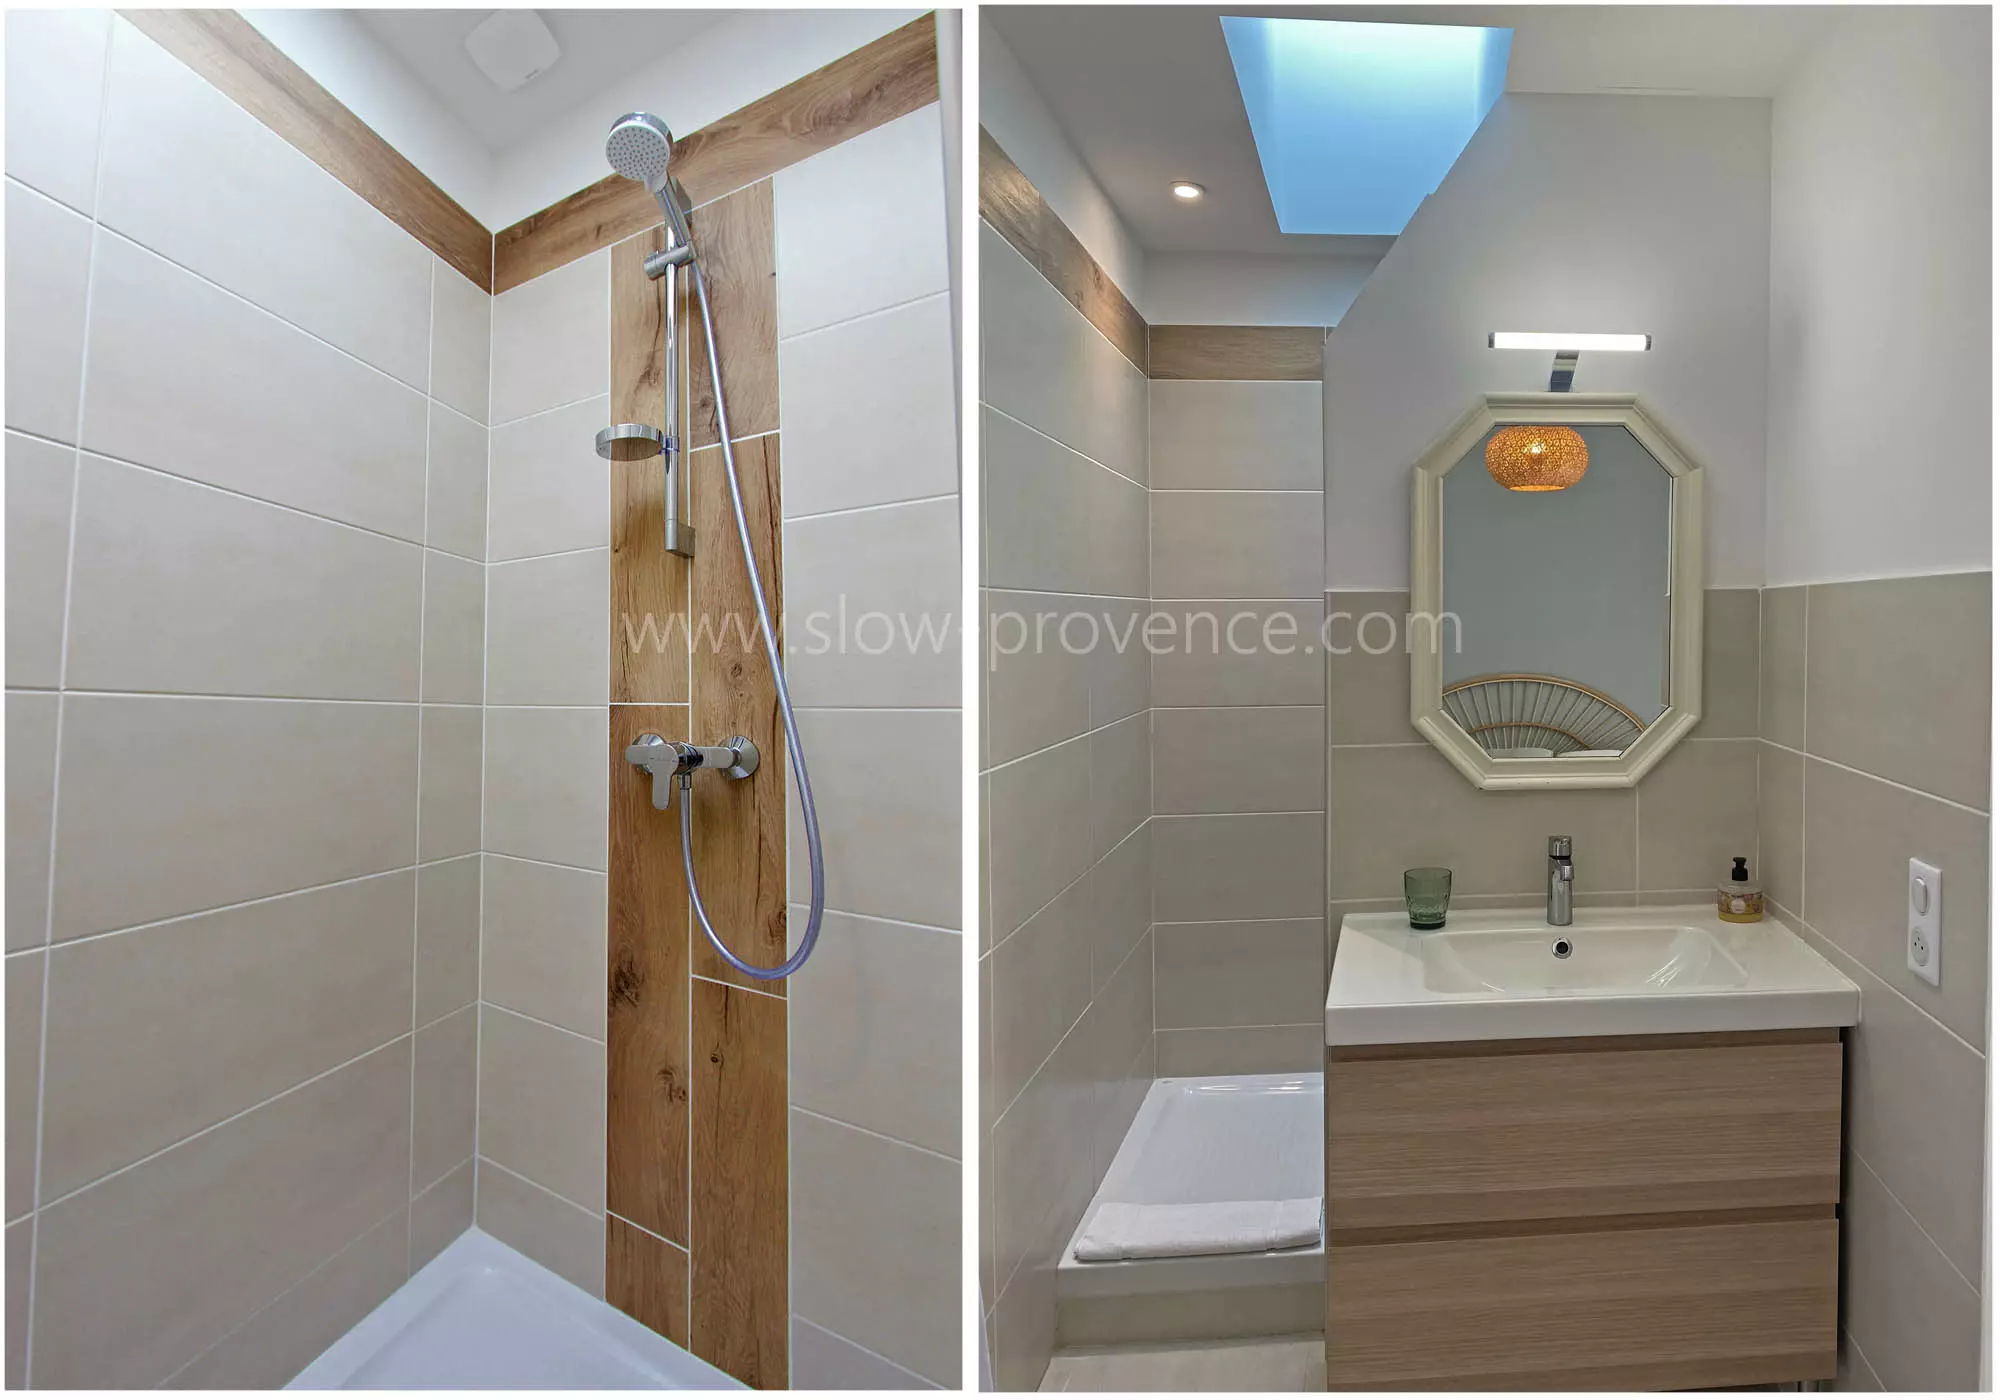 Shower room with walk-in shower